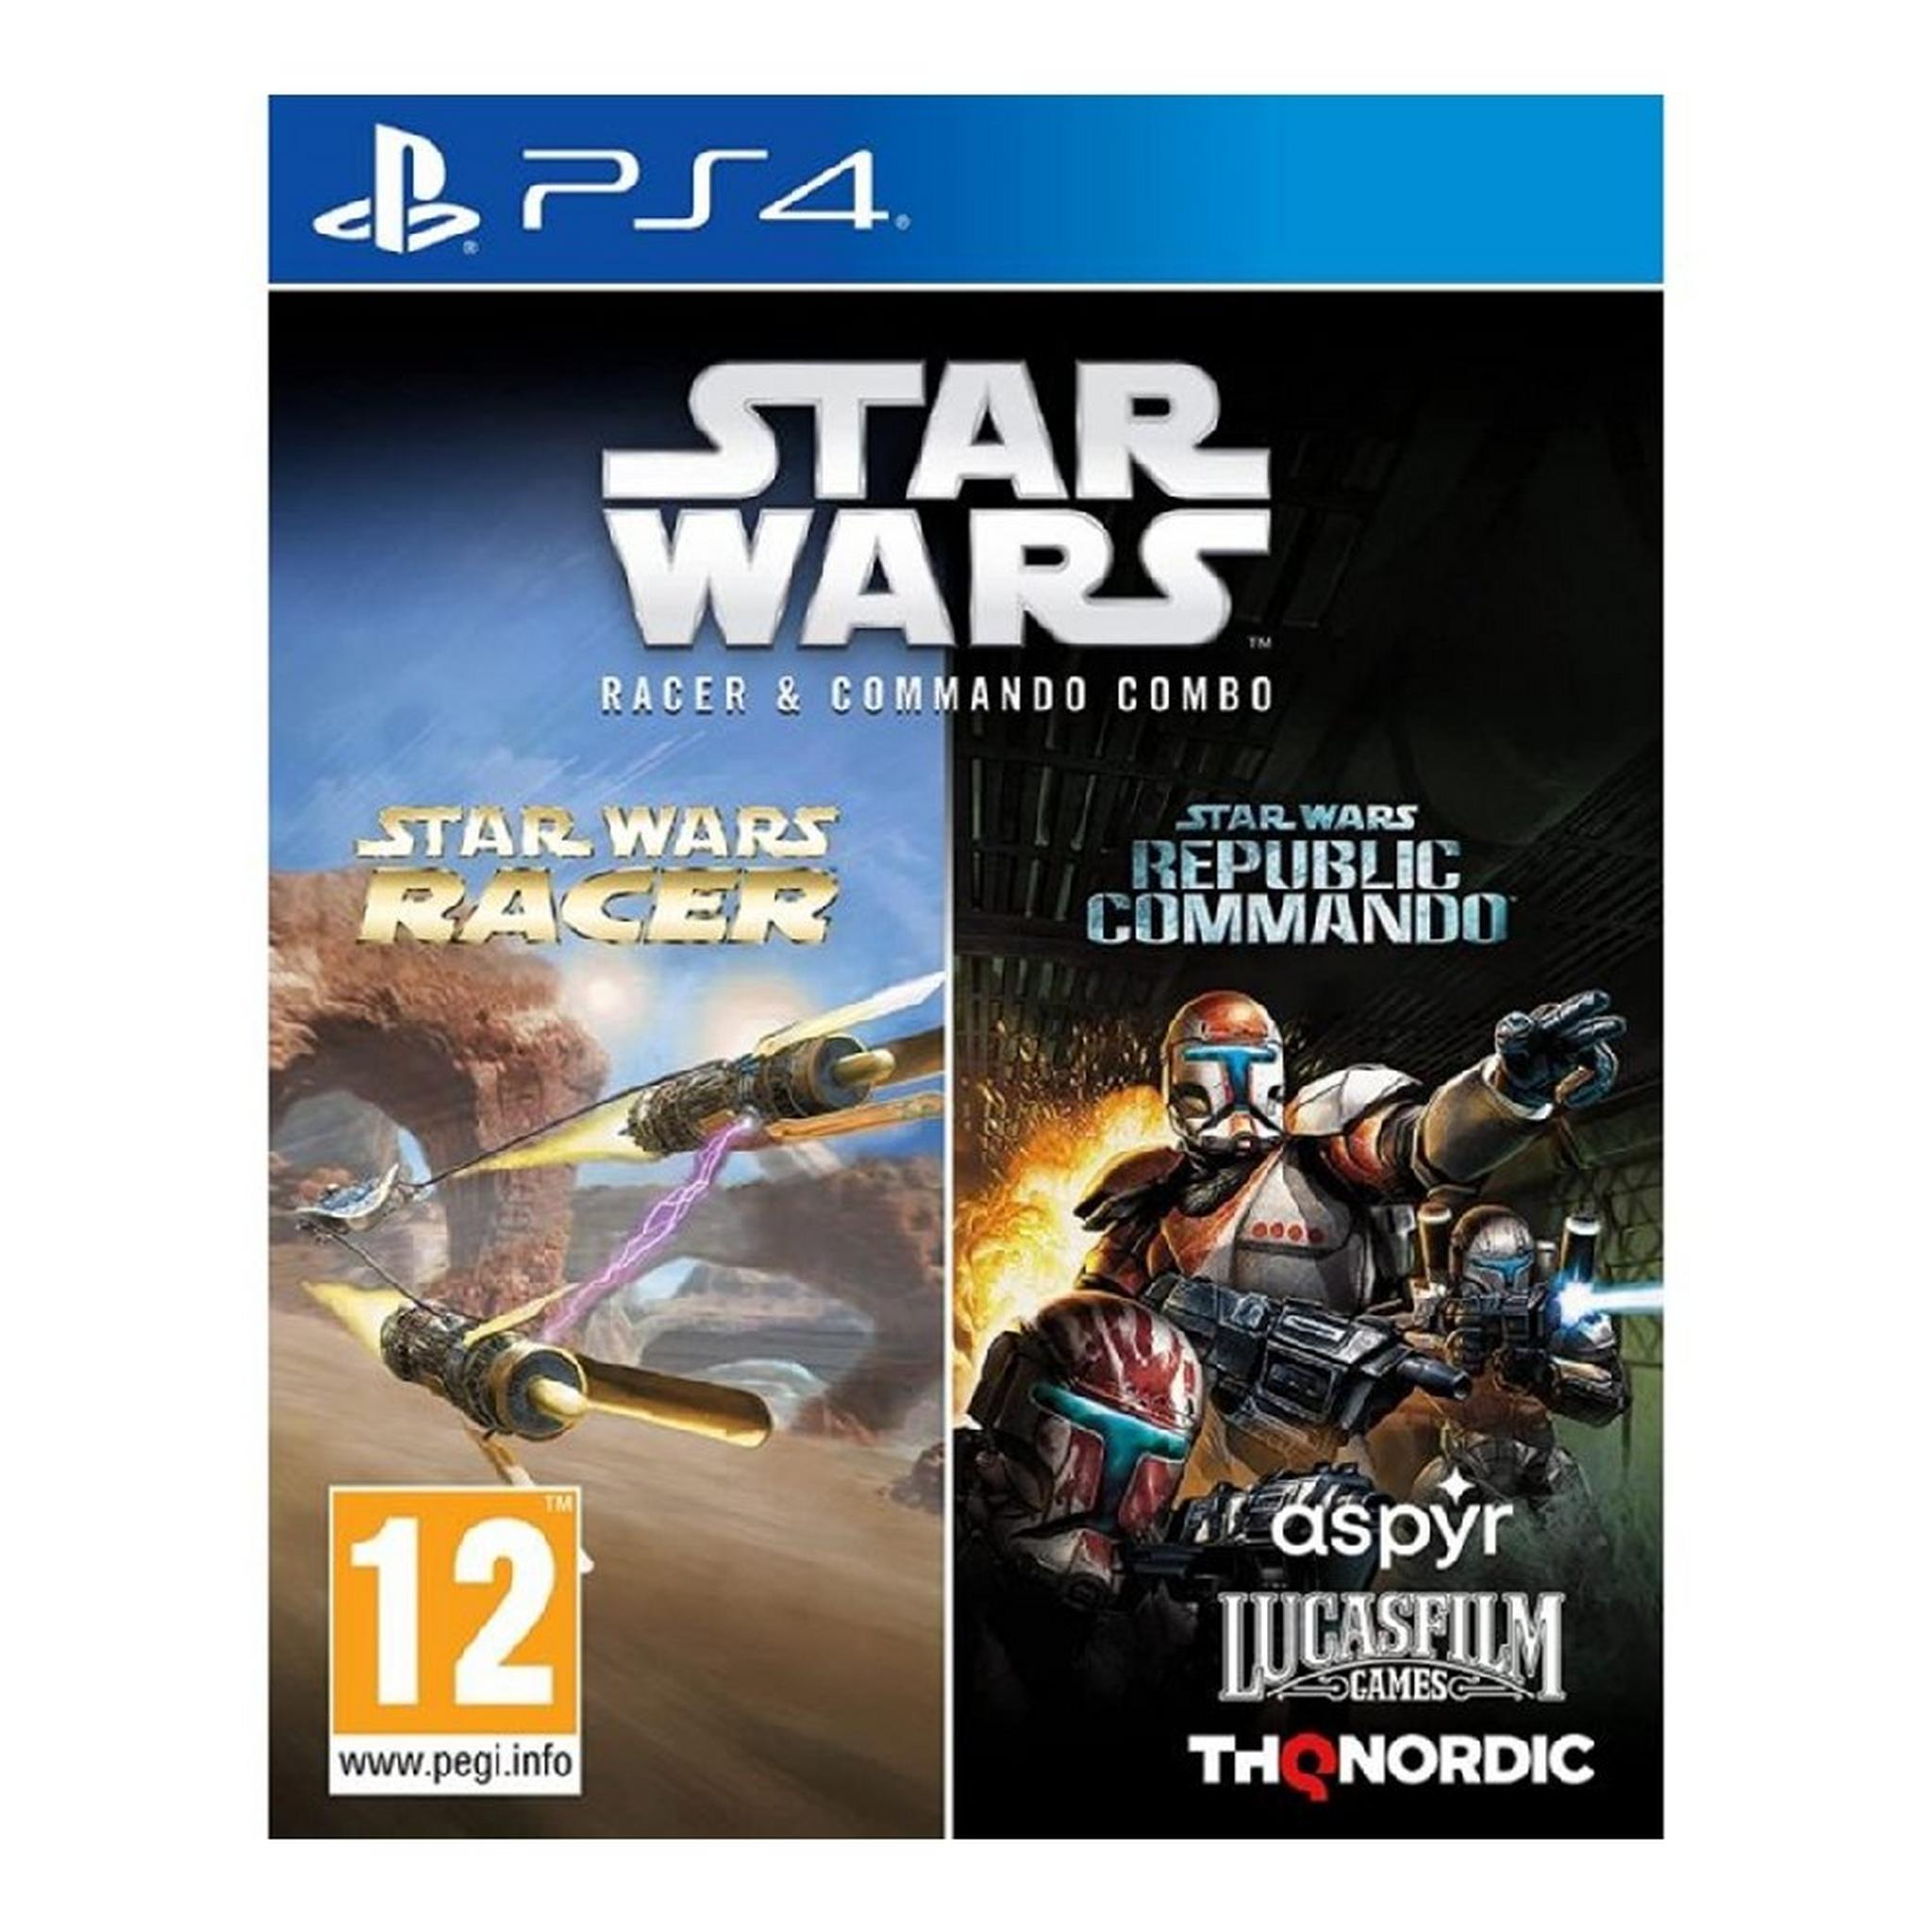 Star Wars Racer and Commando Combo - PS4 Game